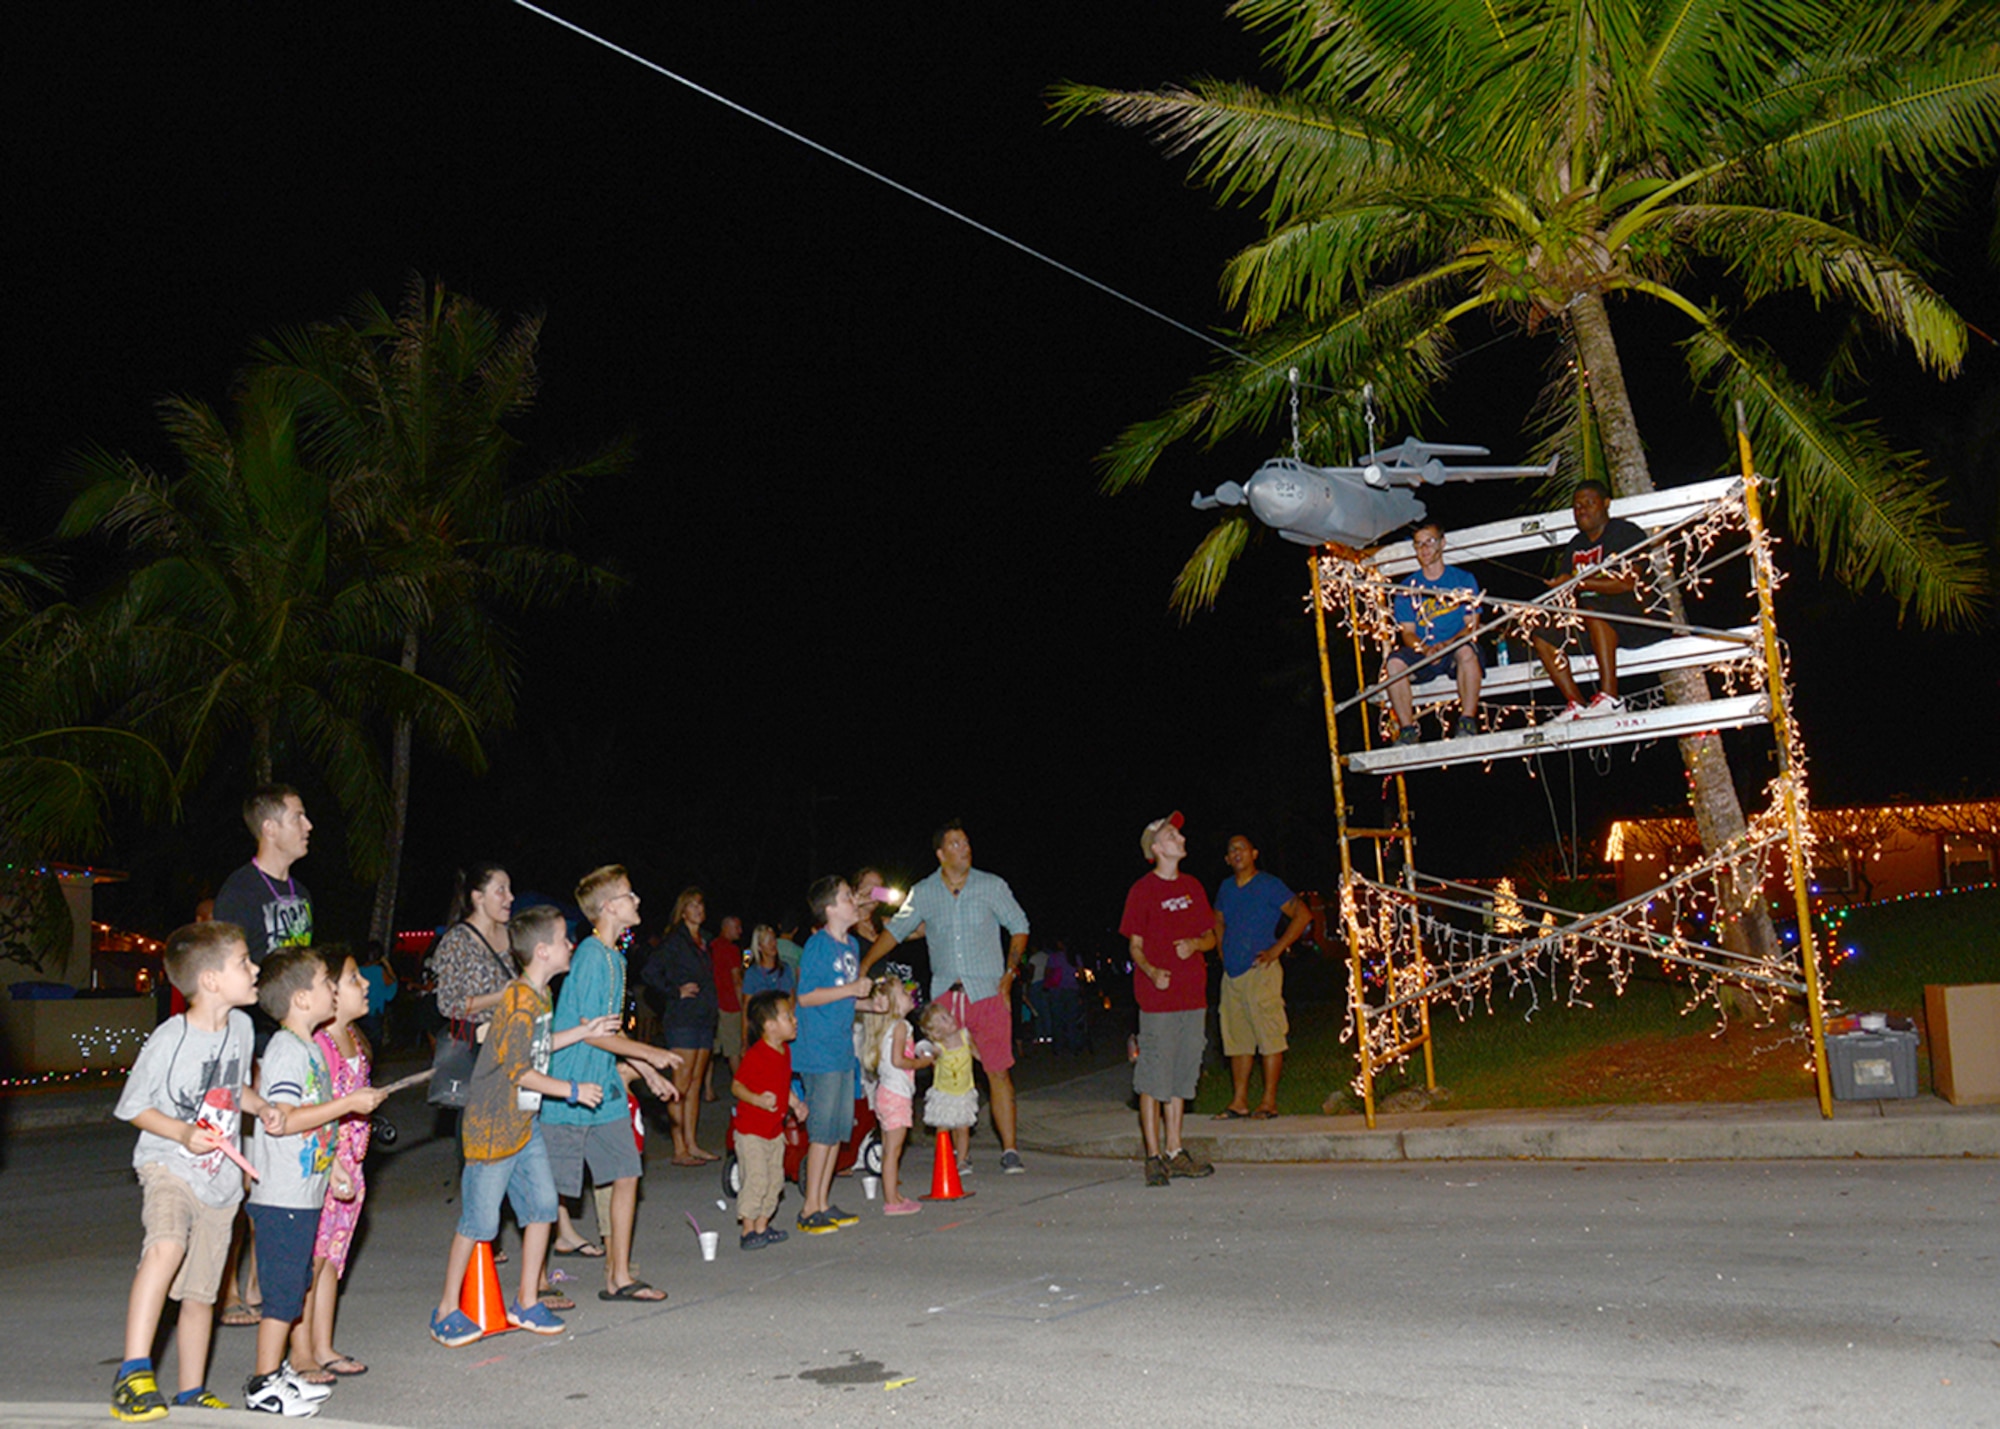 Team Andersen children wait for a model C-17 Globemaster III aircraft to drop candy during the base’s annual Rota Walk event Dec. 13, 2014, at Andersen Air Force Base, Guam.  Hundreds of military members and civilians attended the event which is held every December to showcase holiday decorations in the base housing area on Rota Drive. (U.S. Air Force photo by Tech. Sgt. Zachary Wilson/Released)